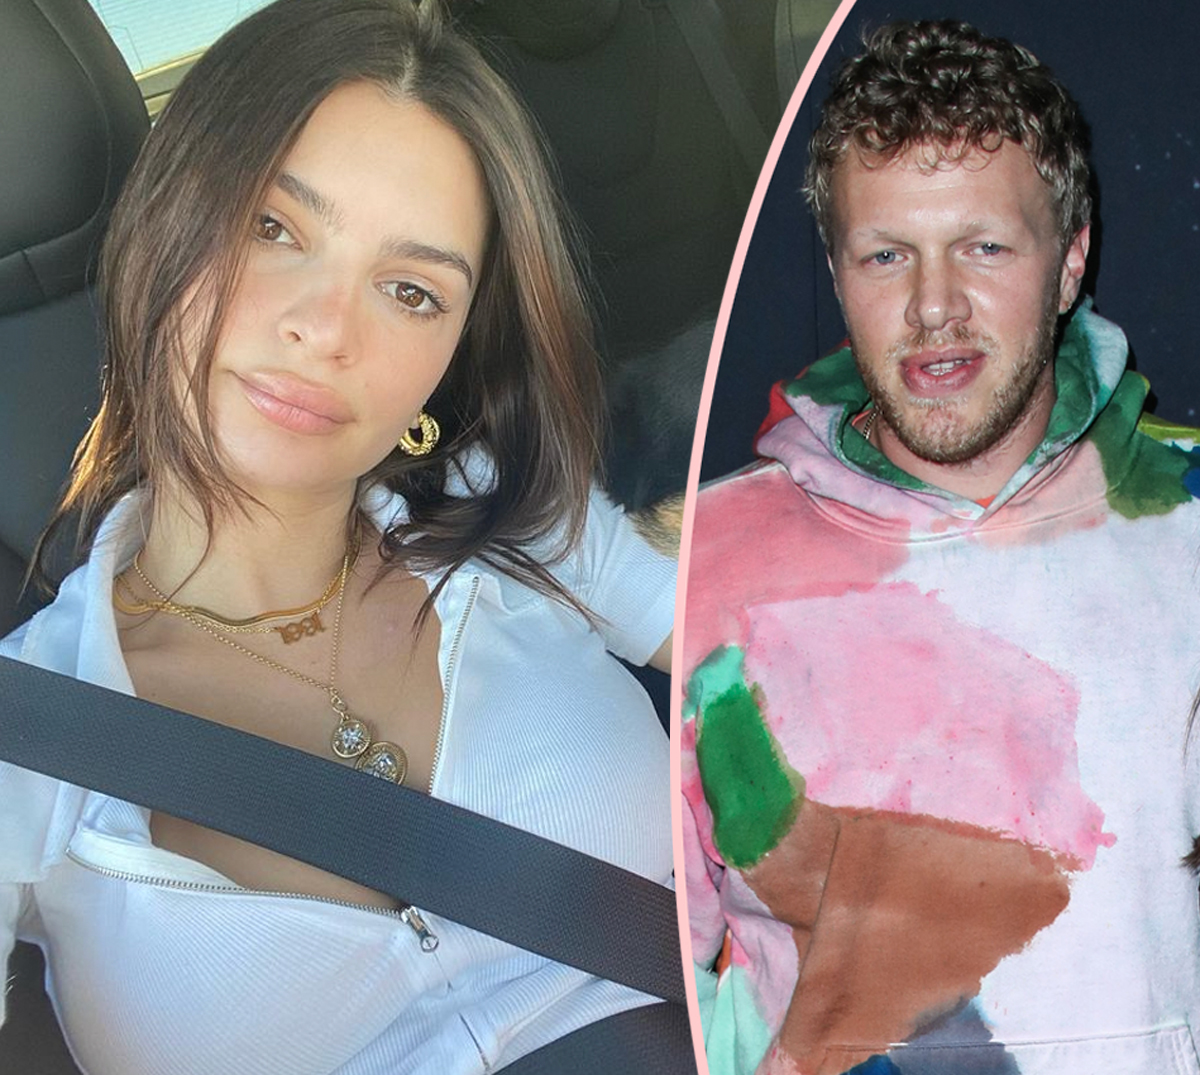 #Emily Ratajkowski’s Wayward Husband Allegedly Booted From His OWN Company Due To ‘Complaints About His Behavior’